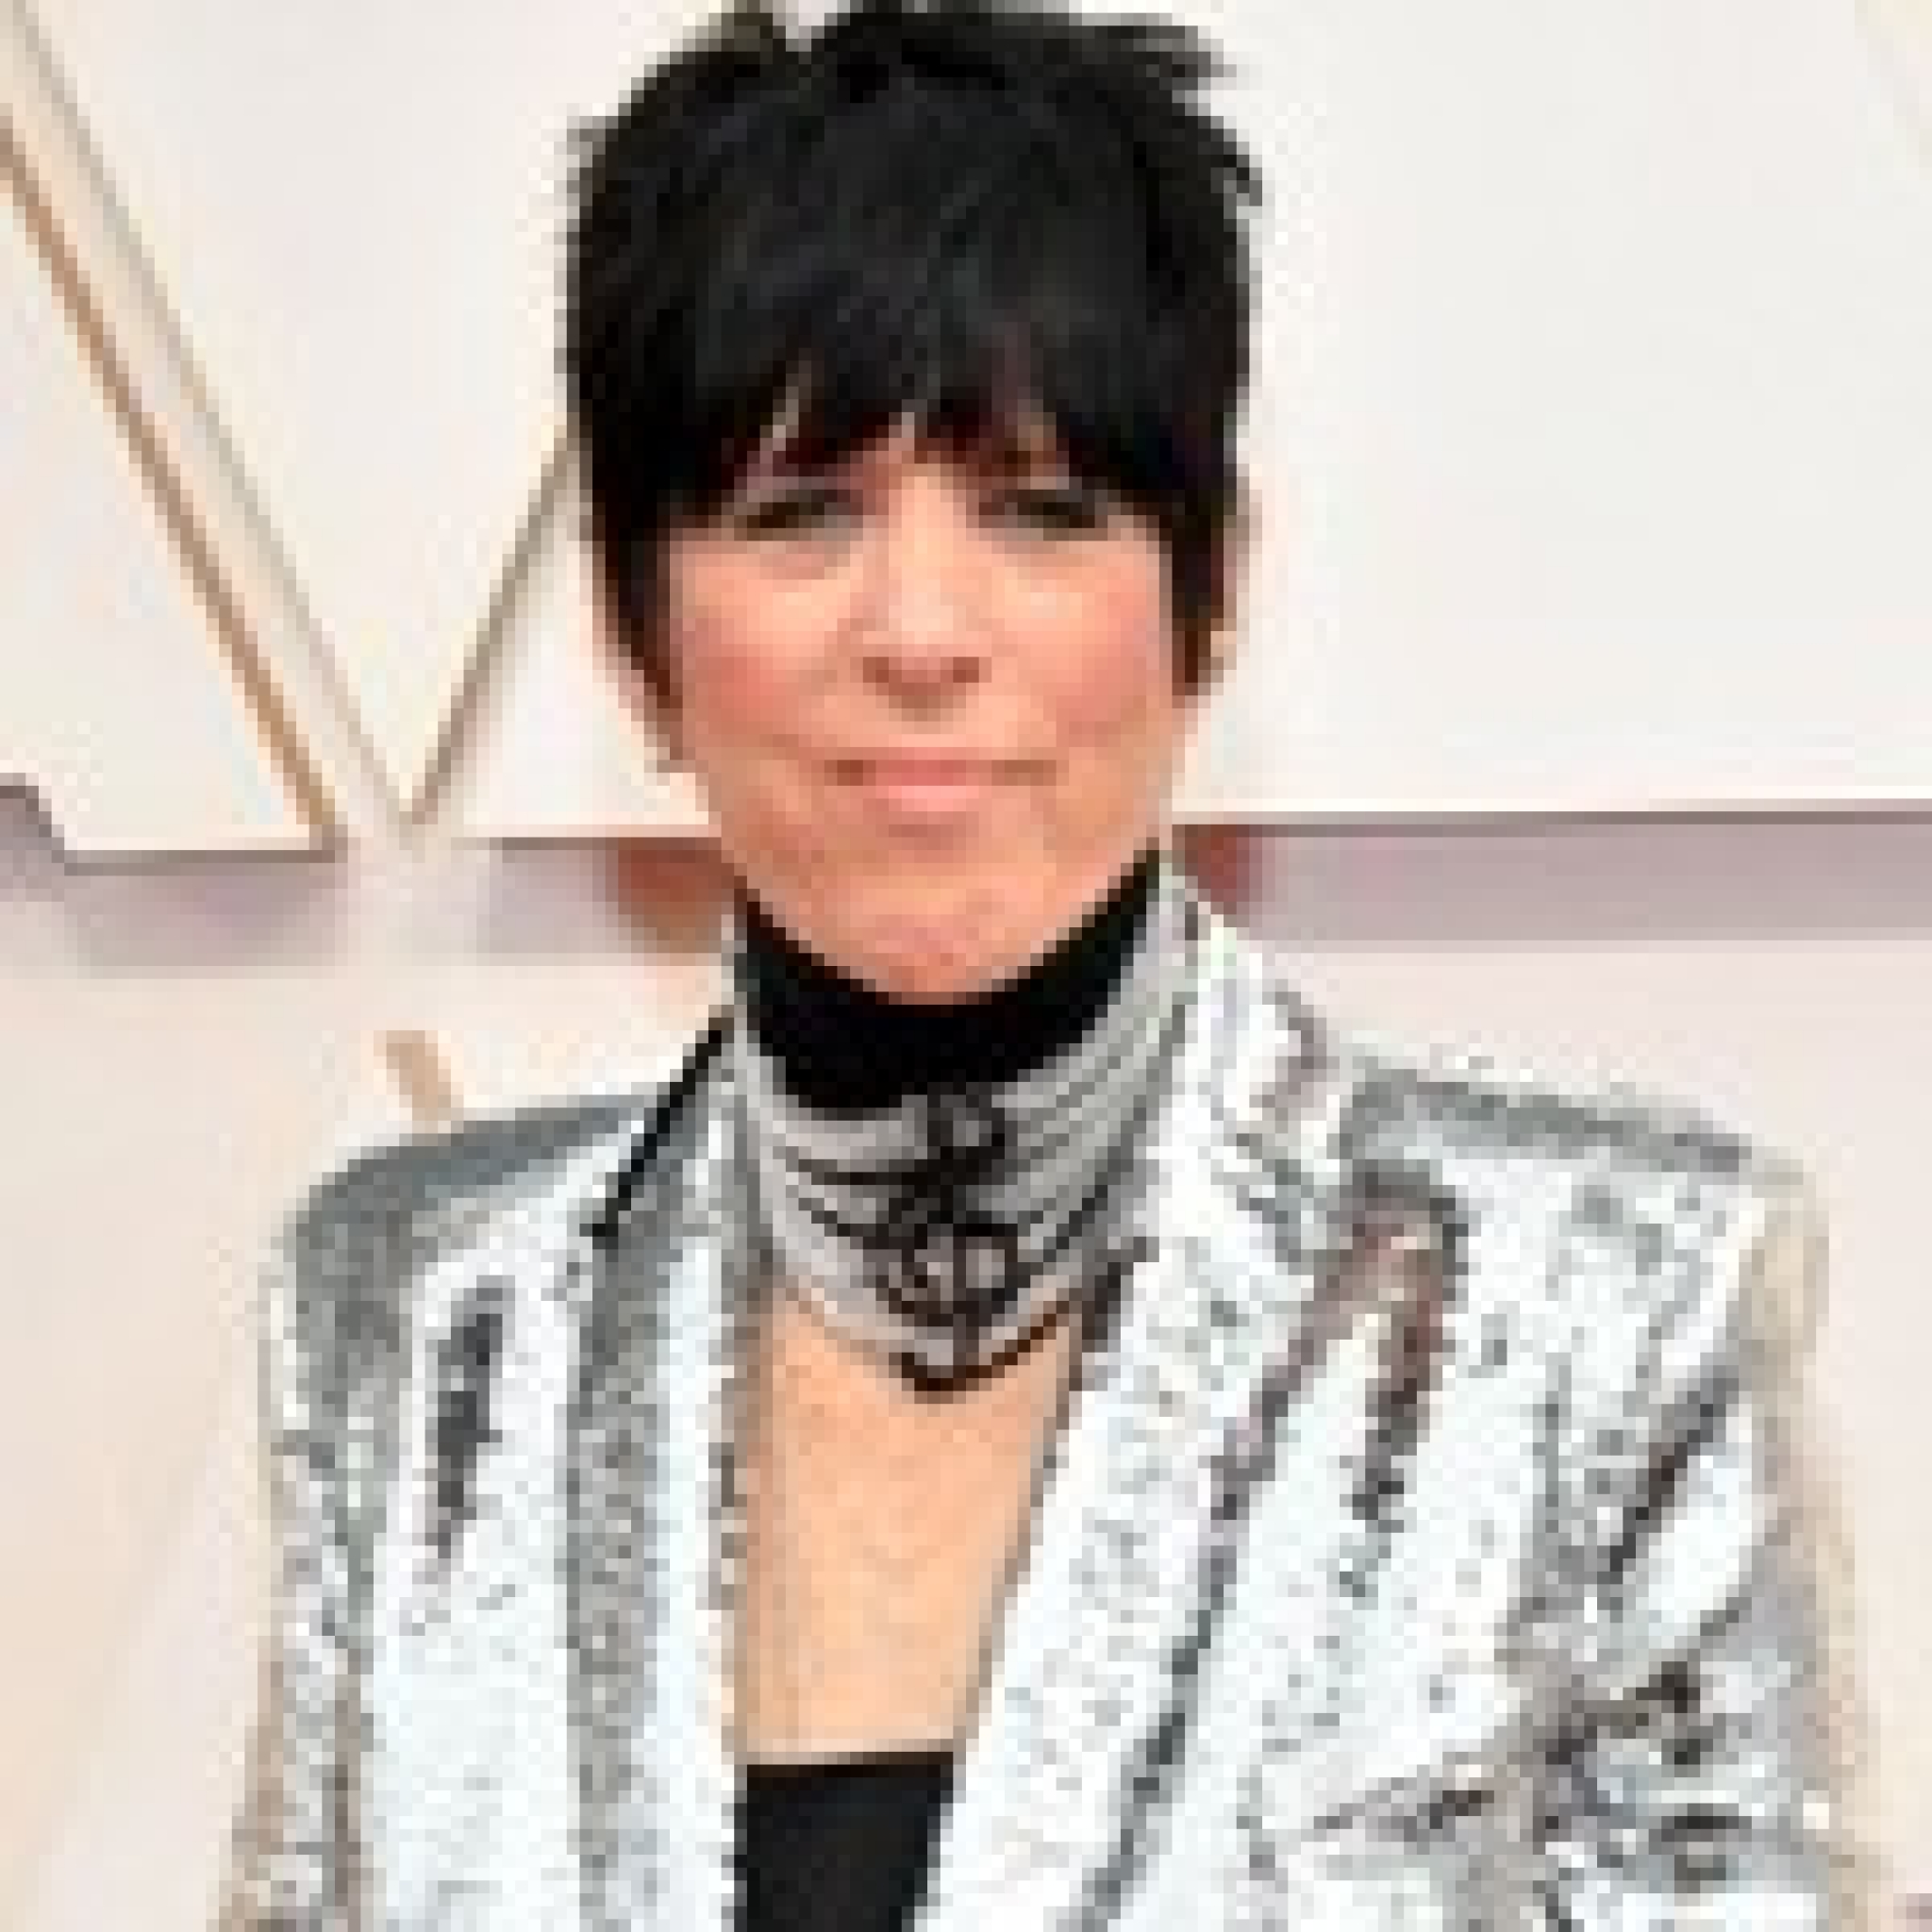 Diane Warren Performs Her 12 Oscar-Nominated Songs in 5 Minutes